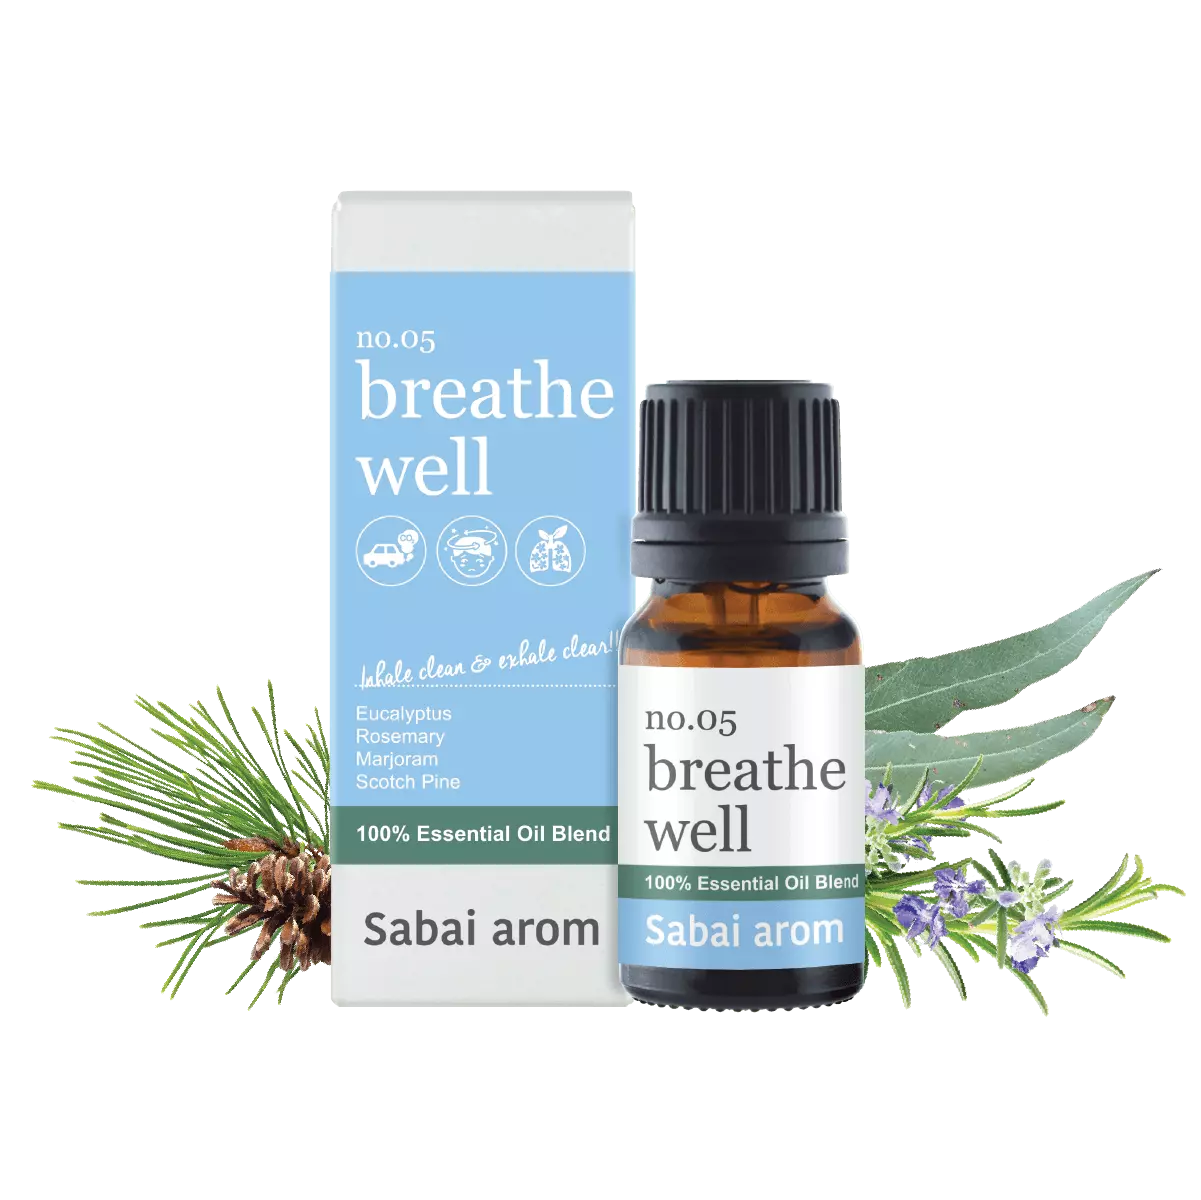 essential oil no05 breathe well 1 Like standing on the mountain top. Where pure and cool air are the gifts that everyone can breathe in freely, Breathe Well is a cooling blend incorporating essential oils of Eucalyptus, Rosemary, Majoram, Scotch Pine and Spearmint to be your harmless nasal unblock pal you should reach whenever dealing with stuffy nose. It provides soothing and nose-clearing effects to make your airways totally smooth be it breathing in or breathing out. The blend is created to be a very good alternative and completely safe natural solution to replace those synthetic inhalants. <strong>Scent</strong> : Like standing on a mountaintop breathing in pure Oxygen and looking down to a grass field and distantly beautiful hilled coverved with green pine trees and thin snow. The sky above is true blue and the cool wind blows mildly.